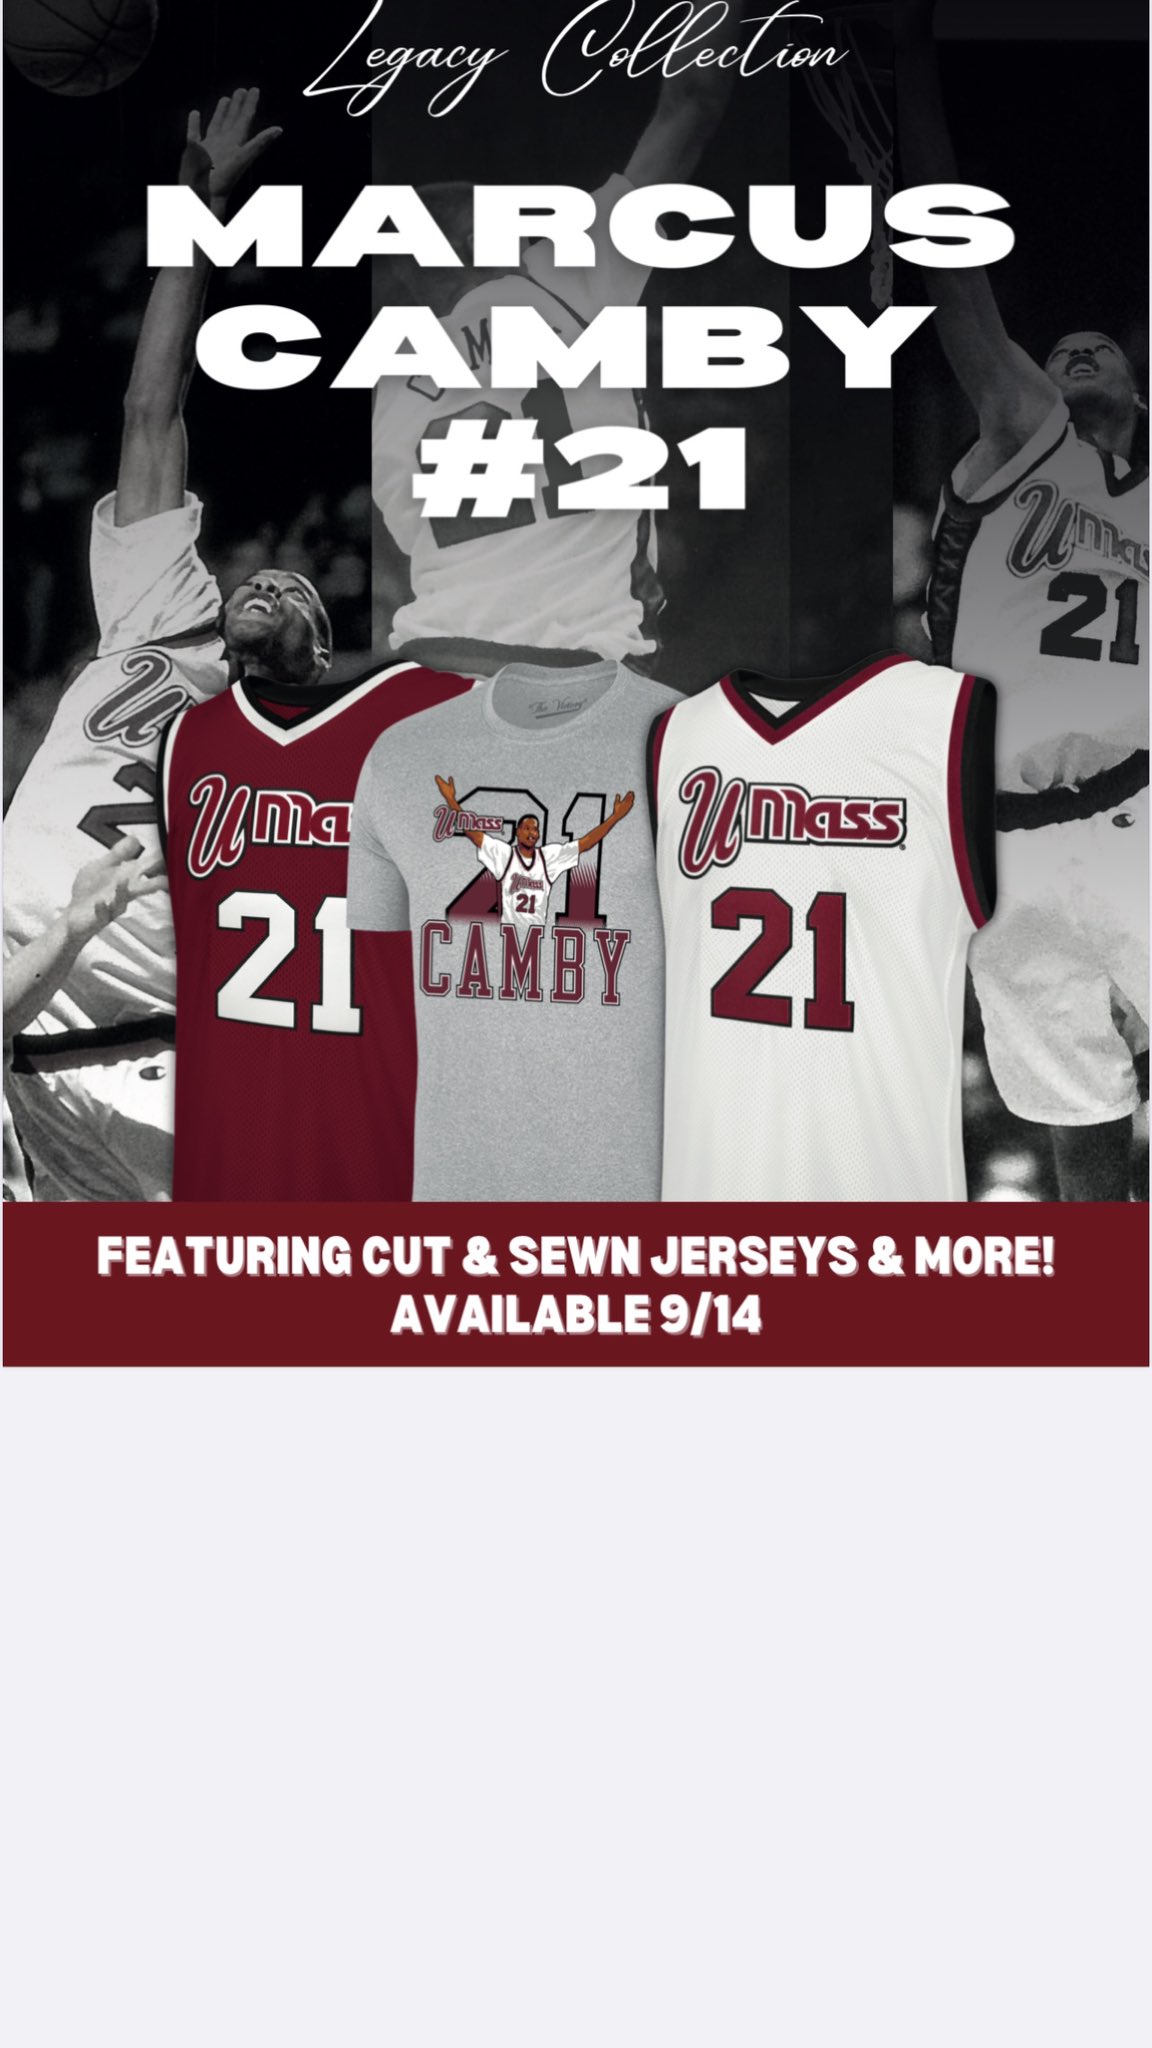 Marcus Camby with undershirt at UMass